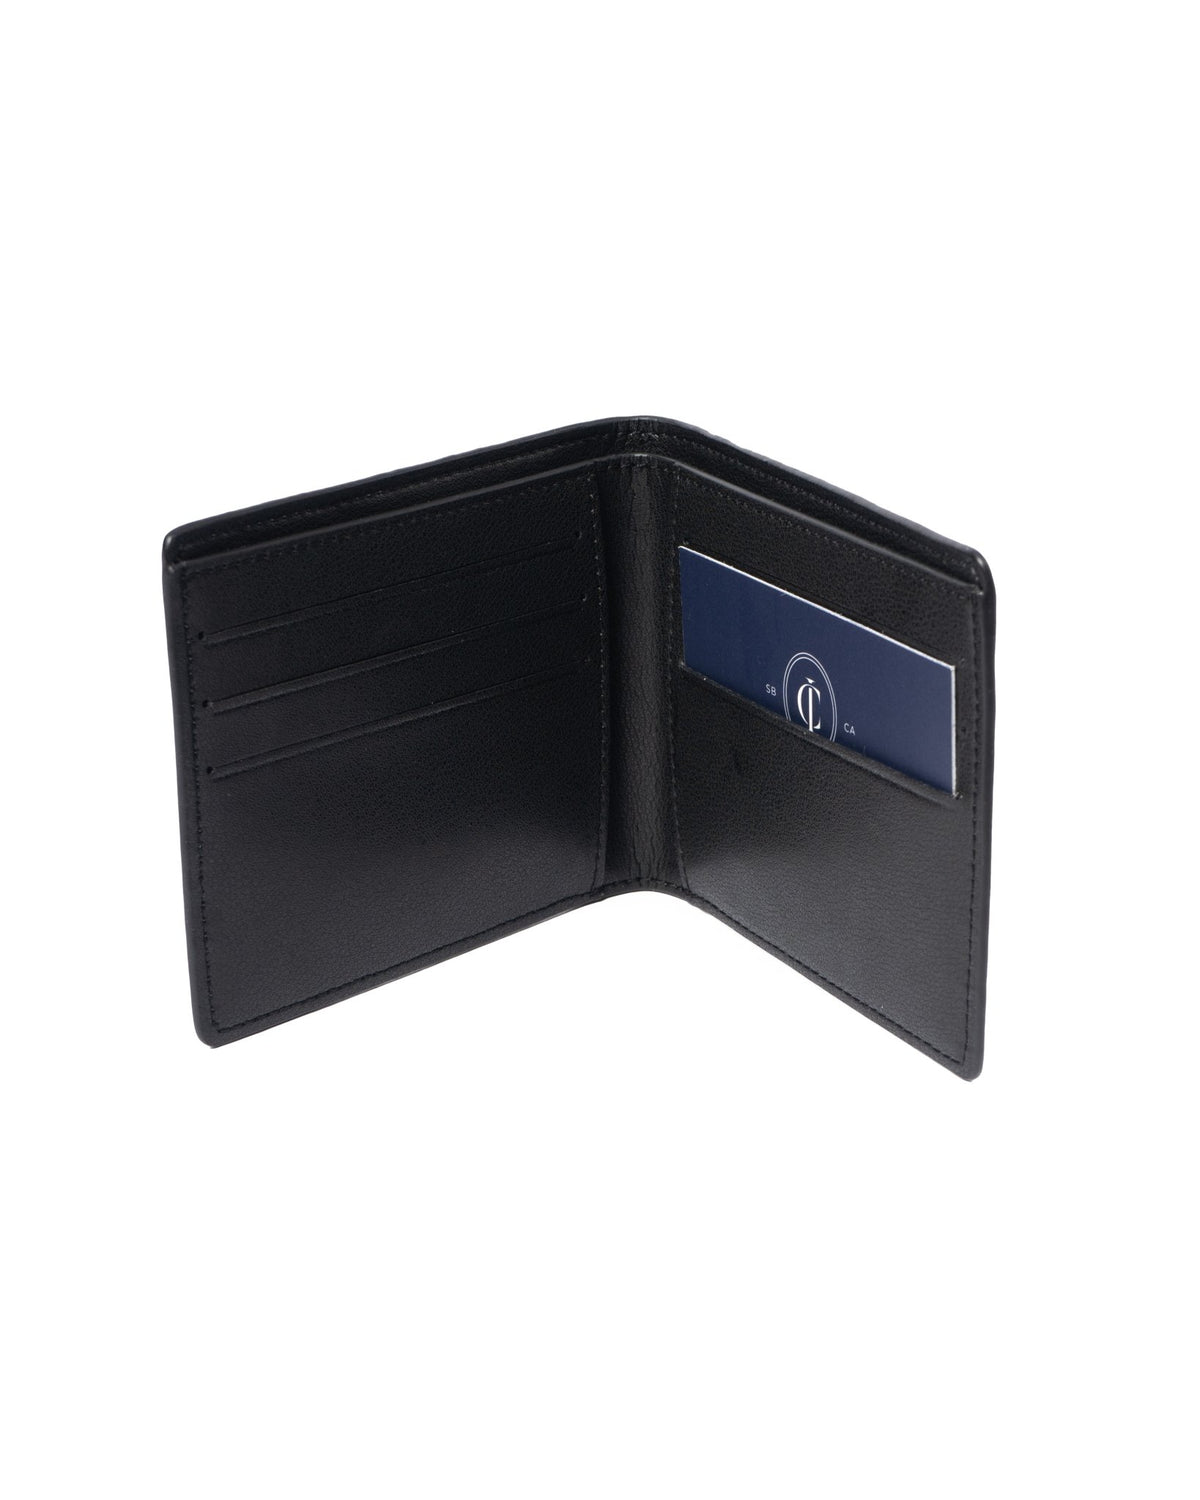 Jetty Billfold Wallet - Recycled Leather - Ivy Cove Montecito